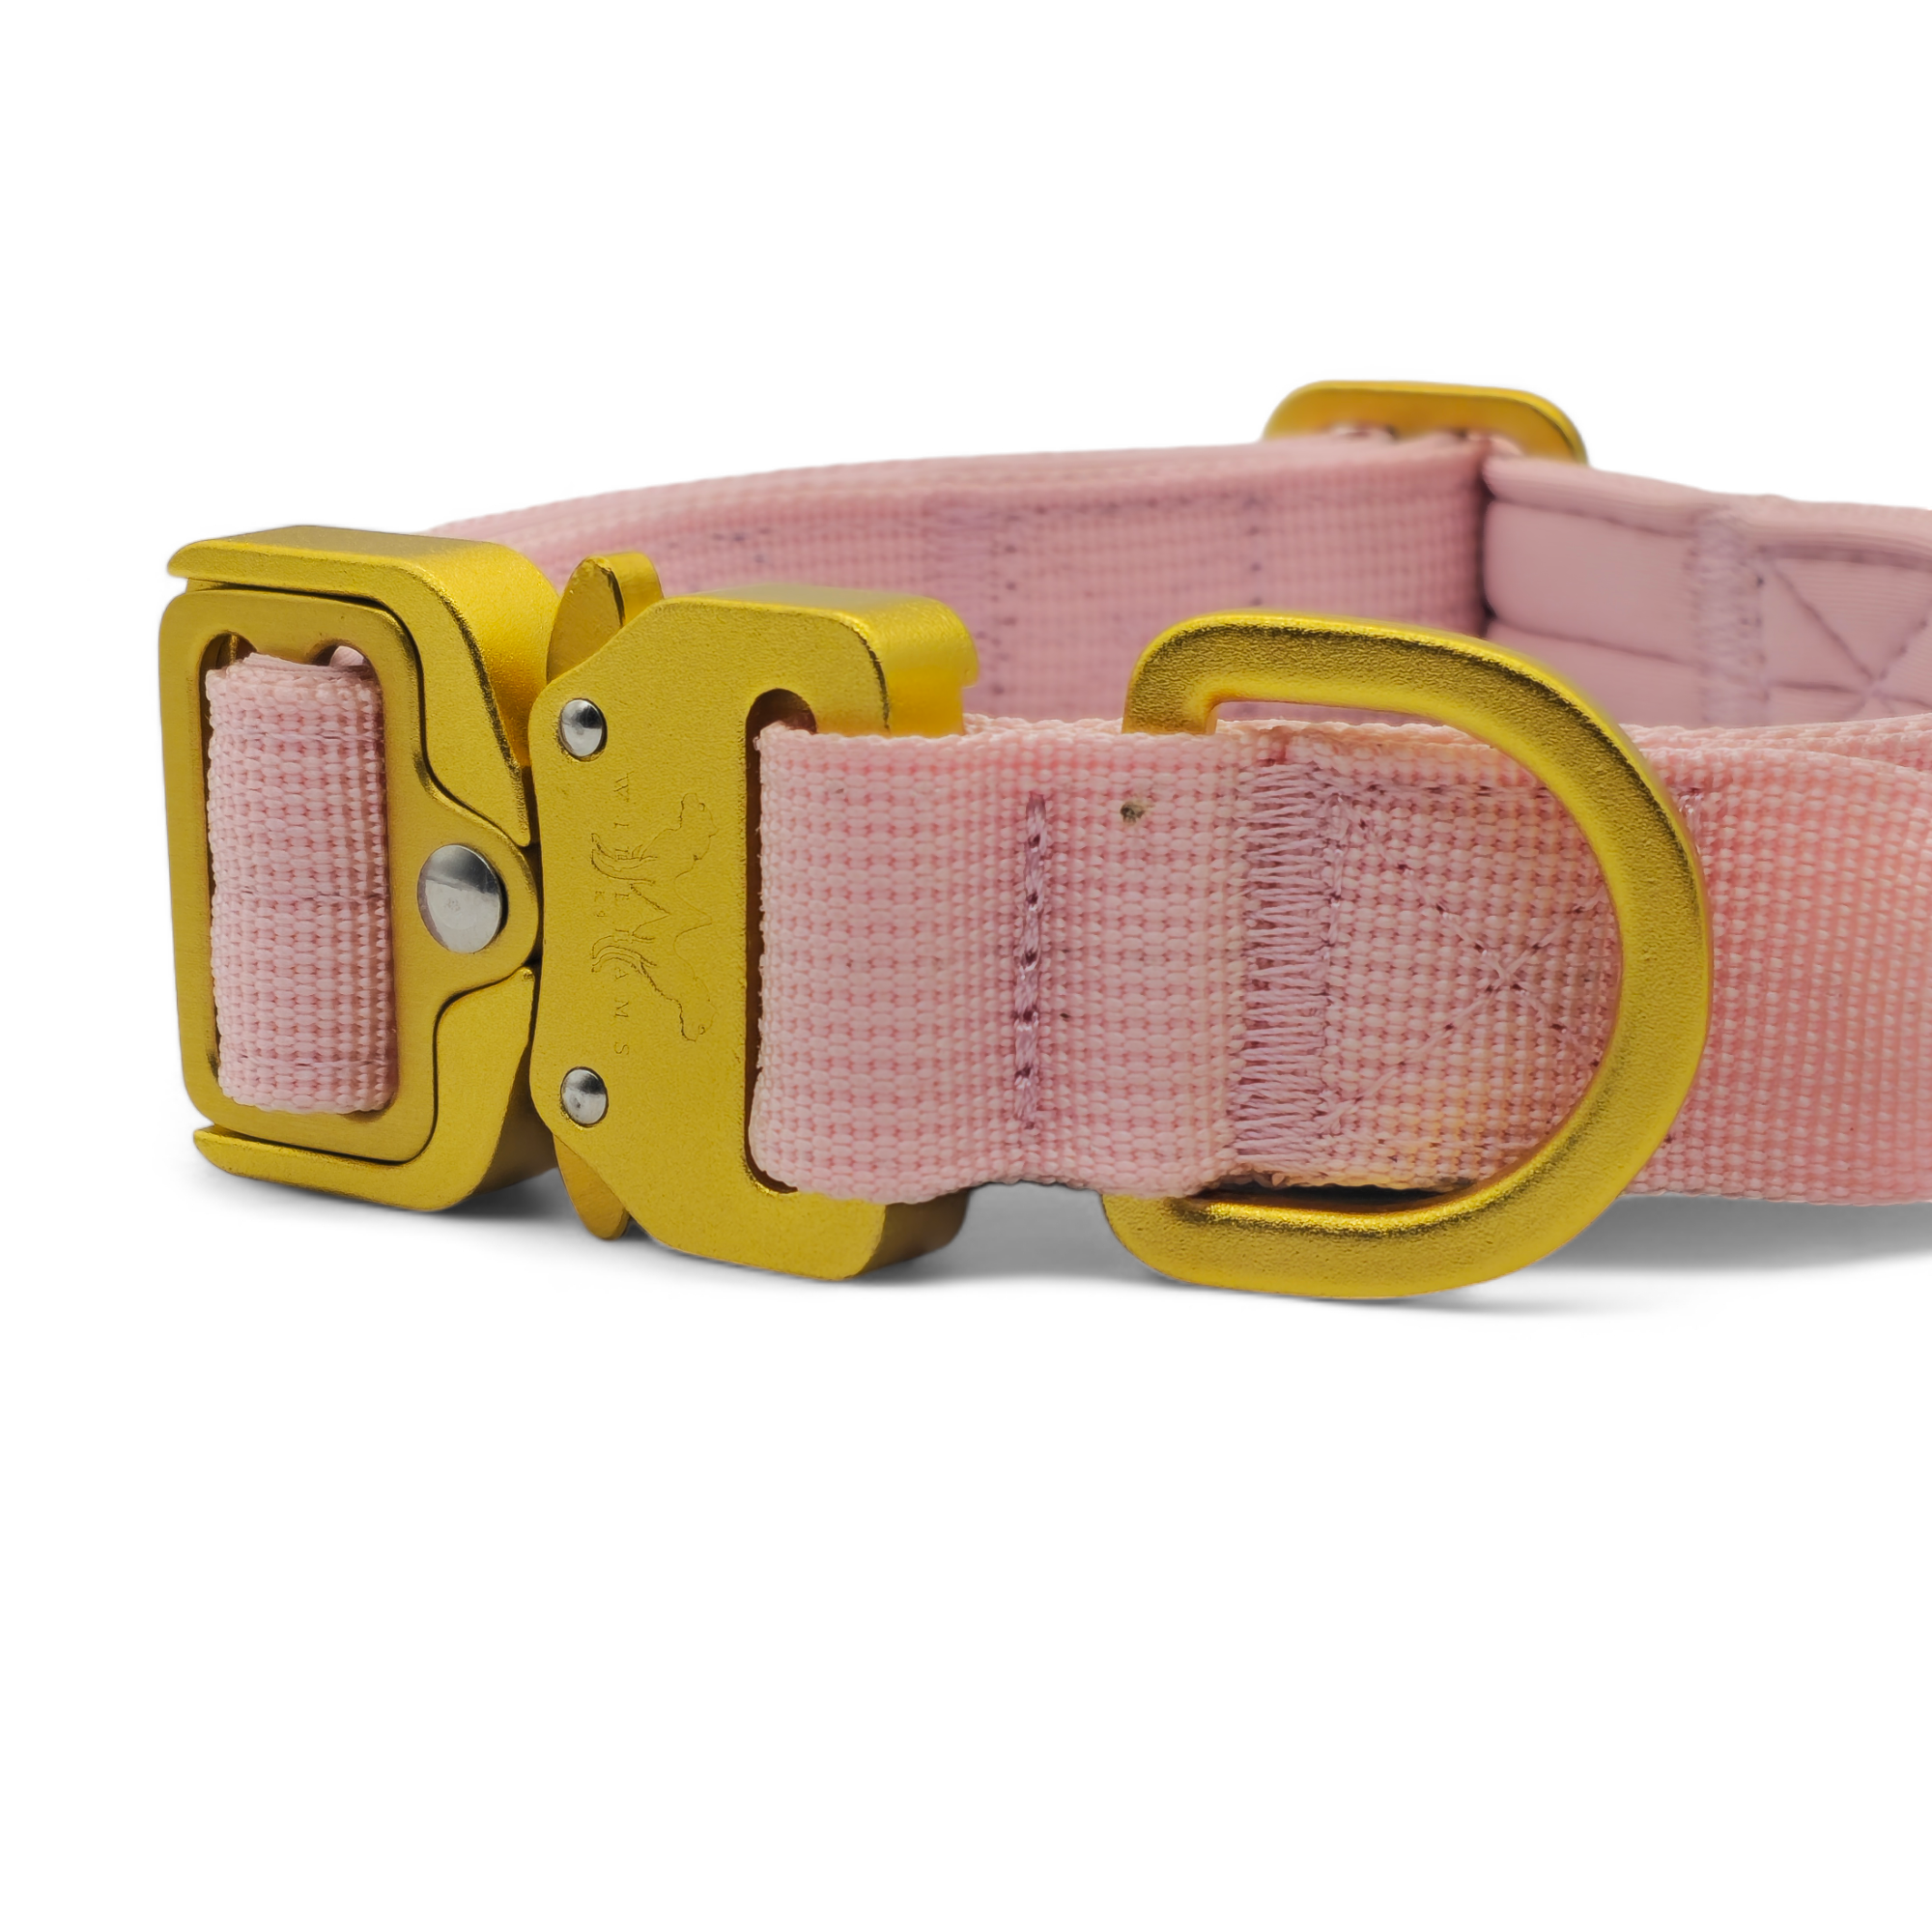 Light Tactical Collar 2.5CM Soft Pink | Triple Stitched Nylon Lightweight Gold Aluminium Buckle + D Ring Adjustable Collar With Handle